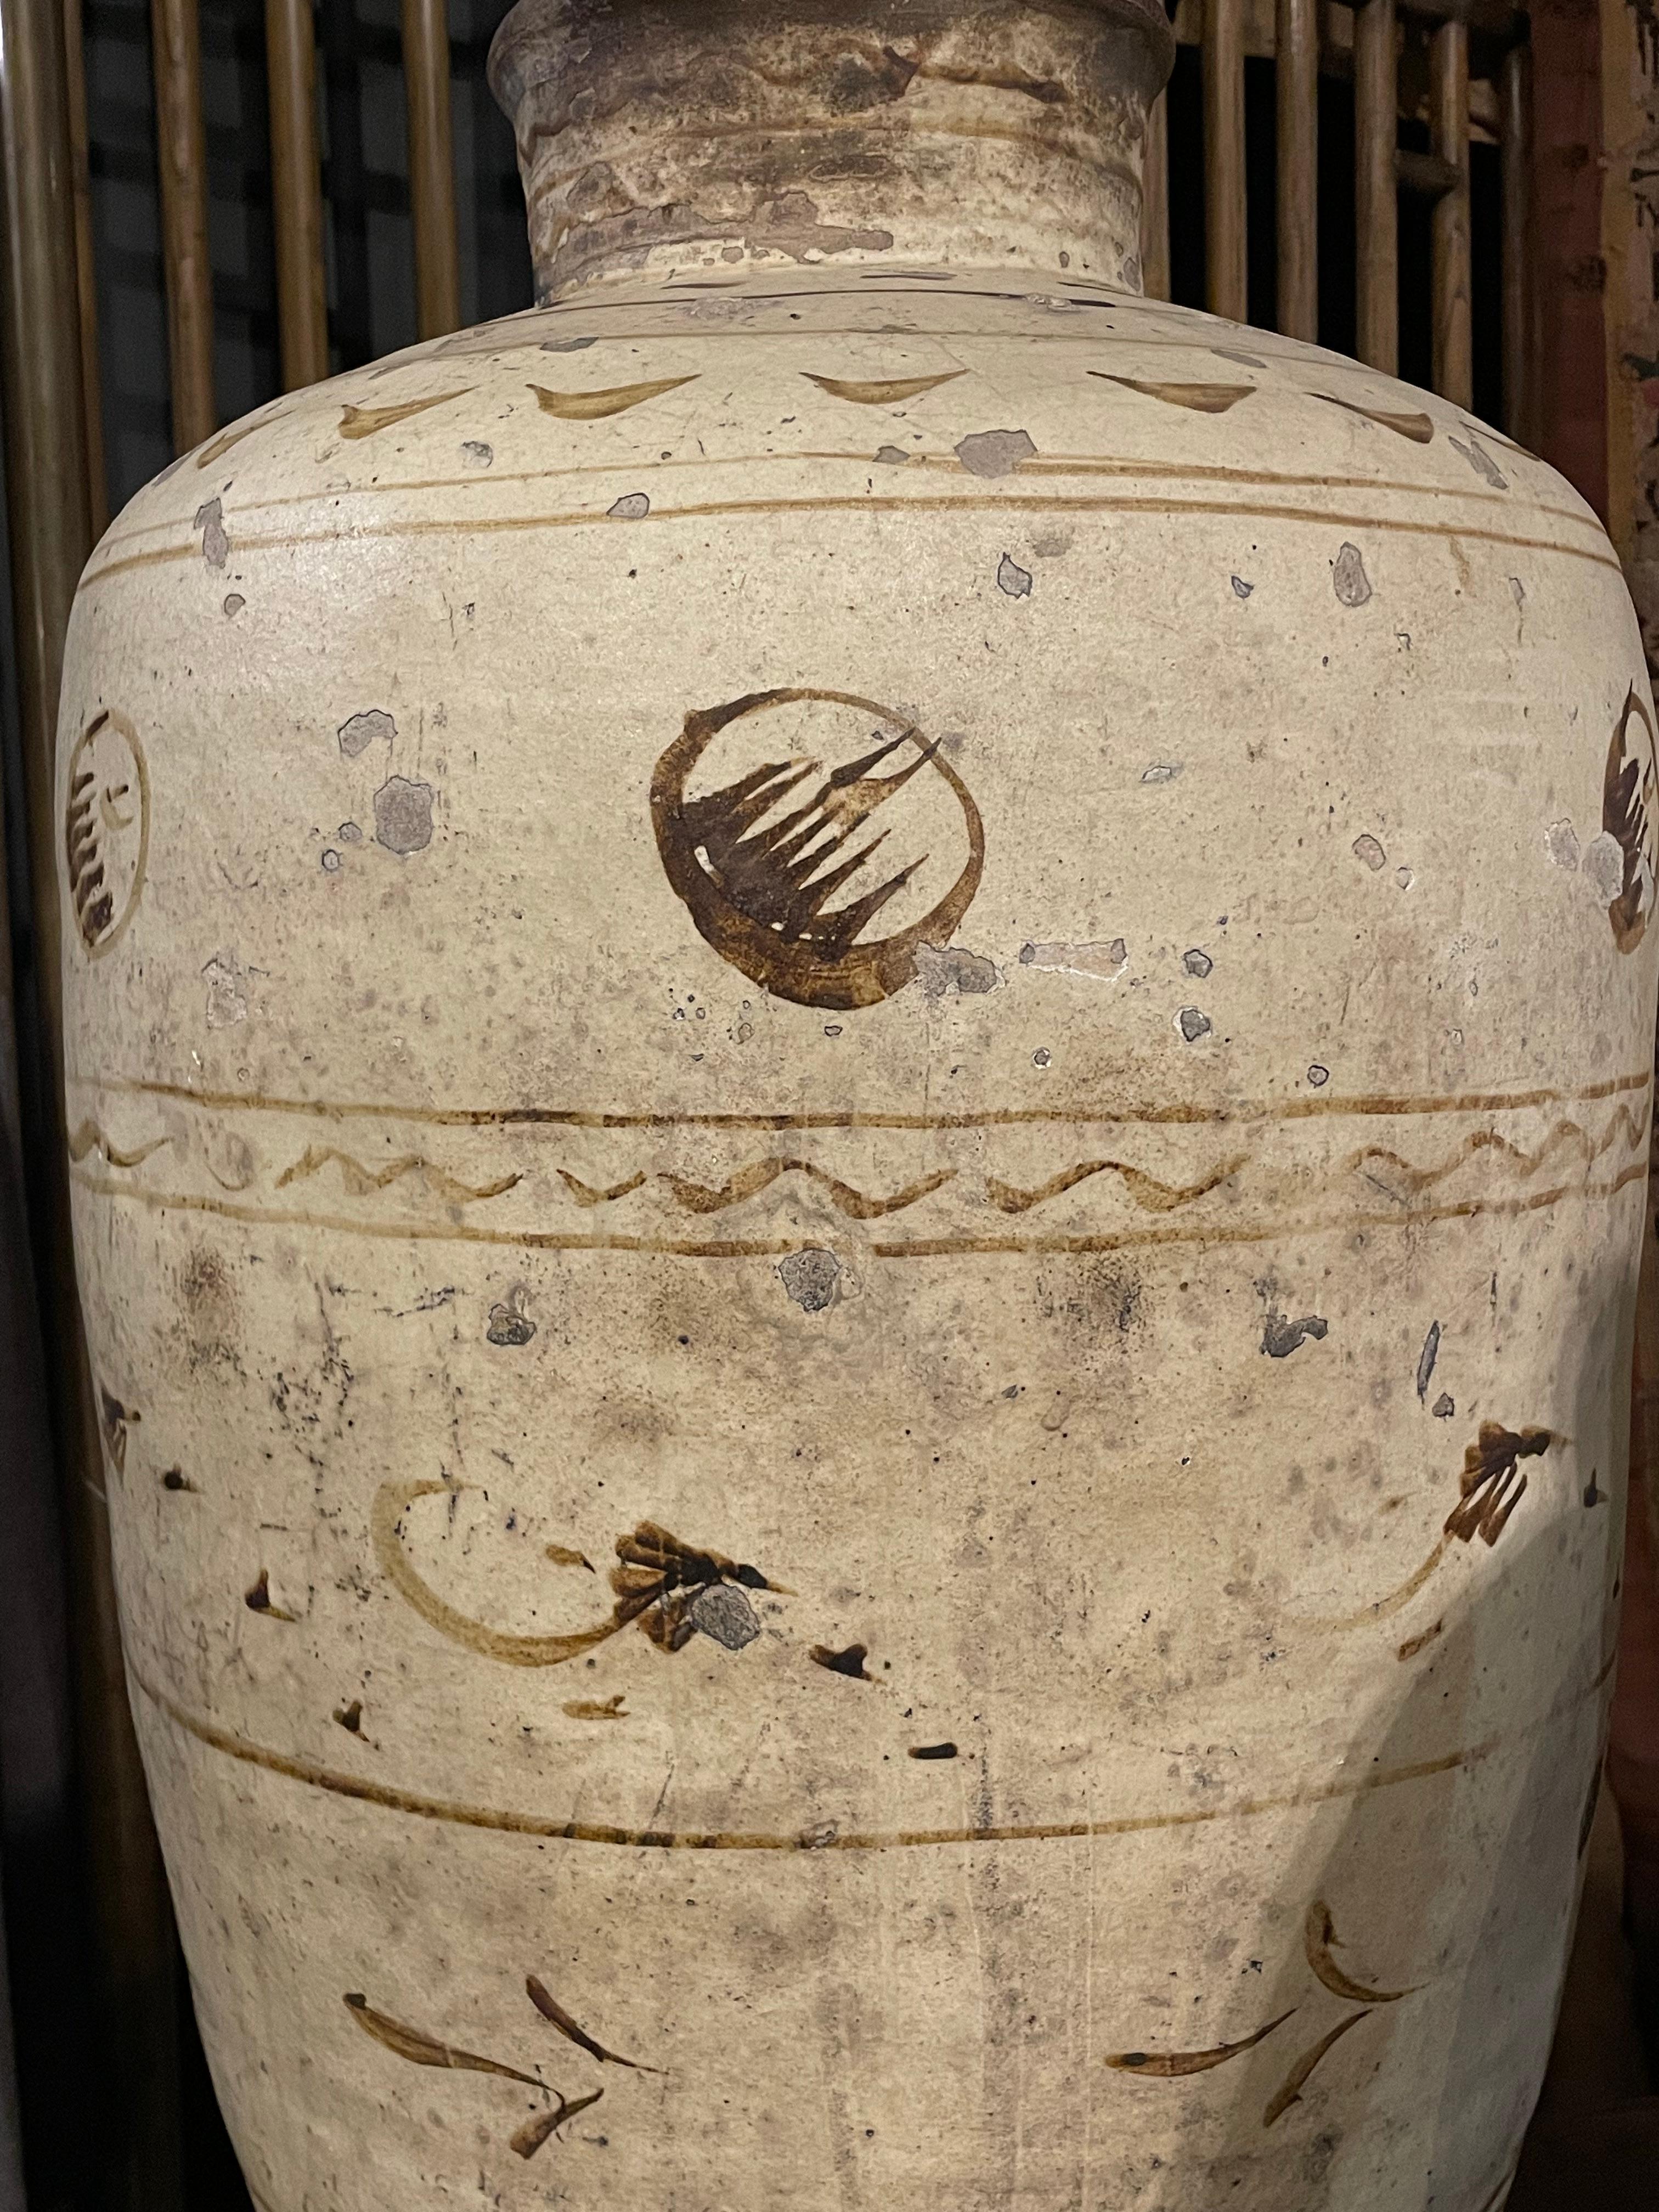 Presenting a remarkable stoneware jar adorned with an exquisite brown and beige glaze, originating from the southern region of China, specifically Cizhou. This piece is a fine example of Chinese ceramic craftsmanship, showcasing the distinct